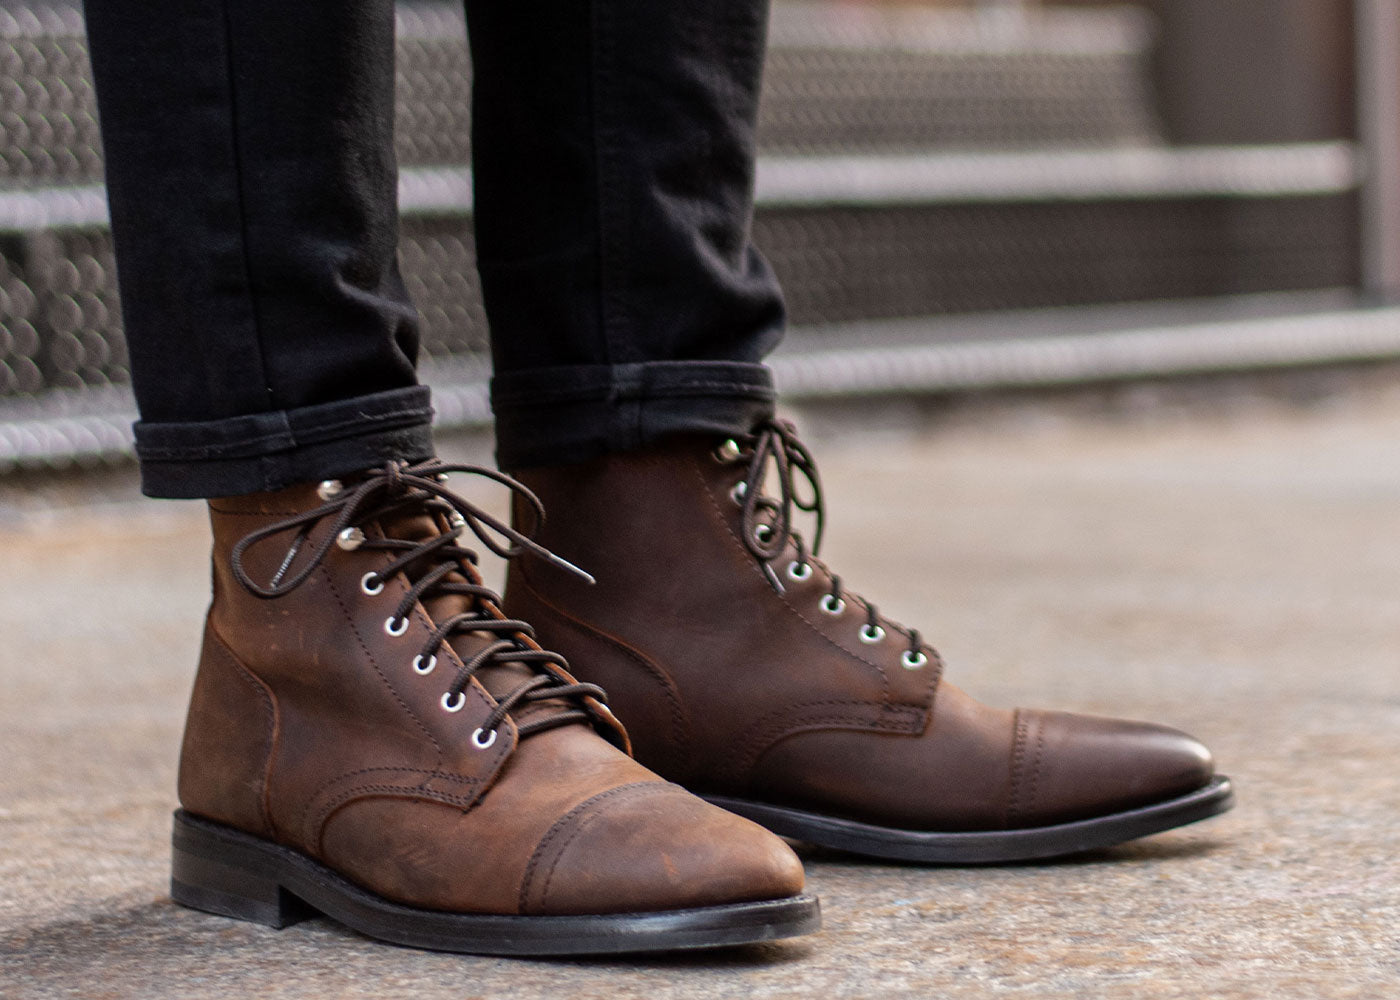 Thursday Boot Company - That's Vachetta for ya! Meet our newest